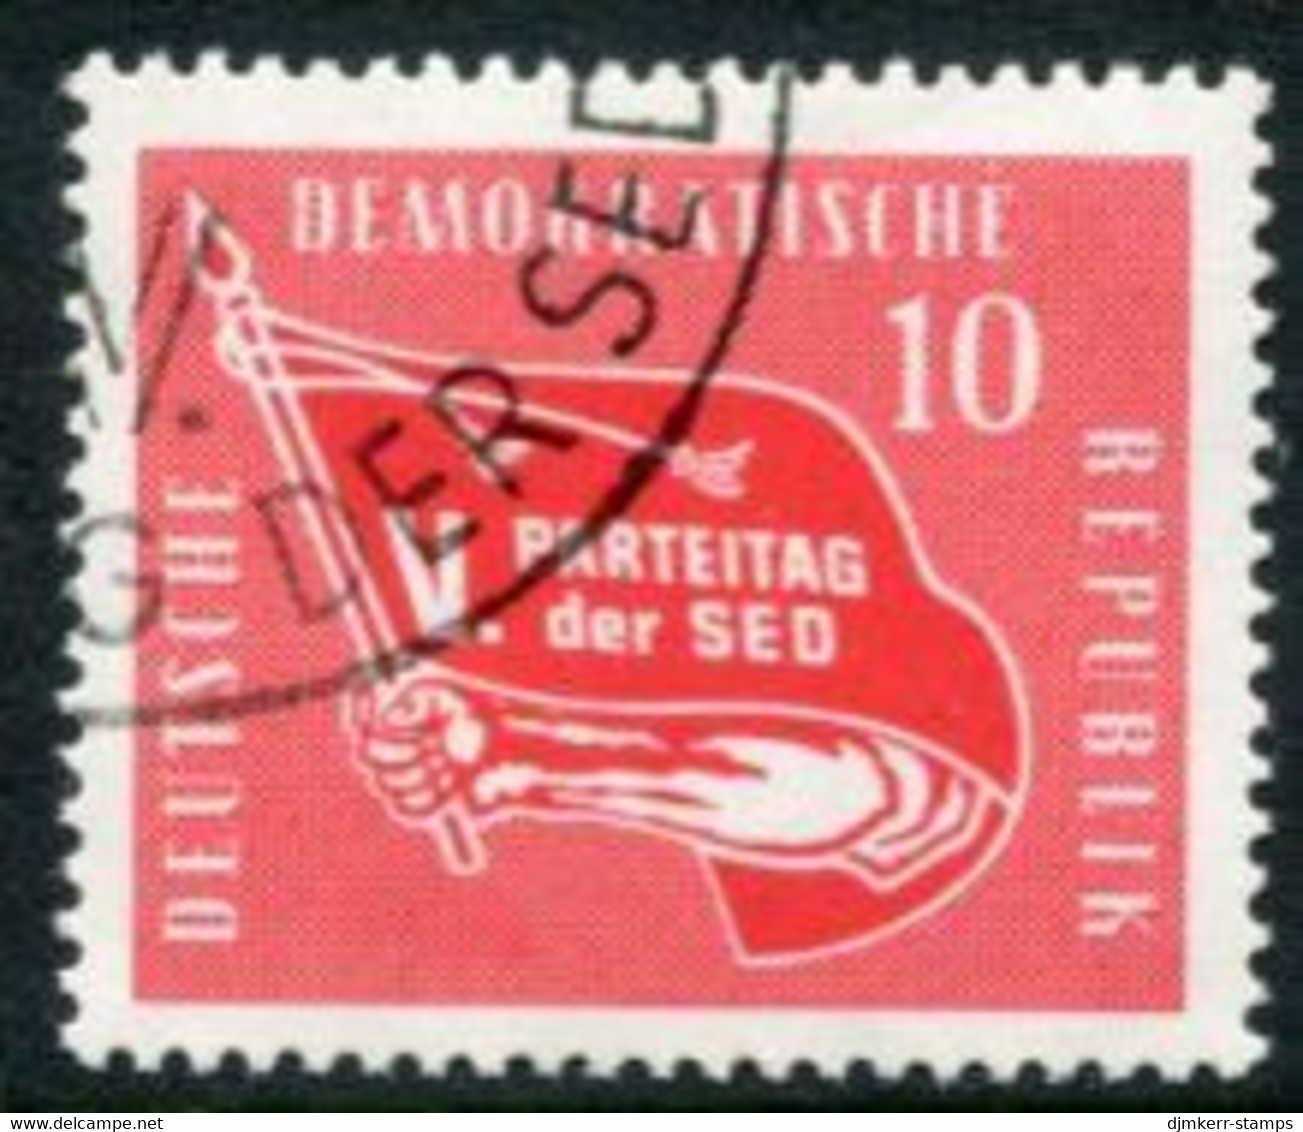 DDR / E. GERMANY 1958 Socialist Unity Party Day Used.  Michel  633 - Used Stamps